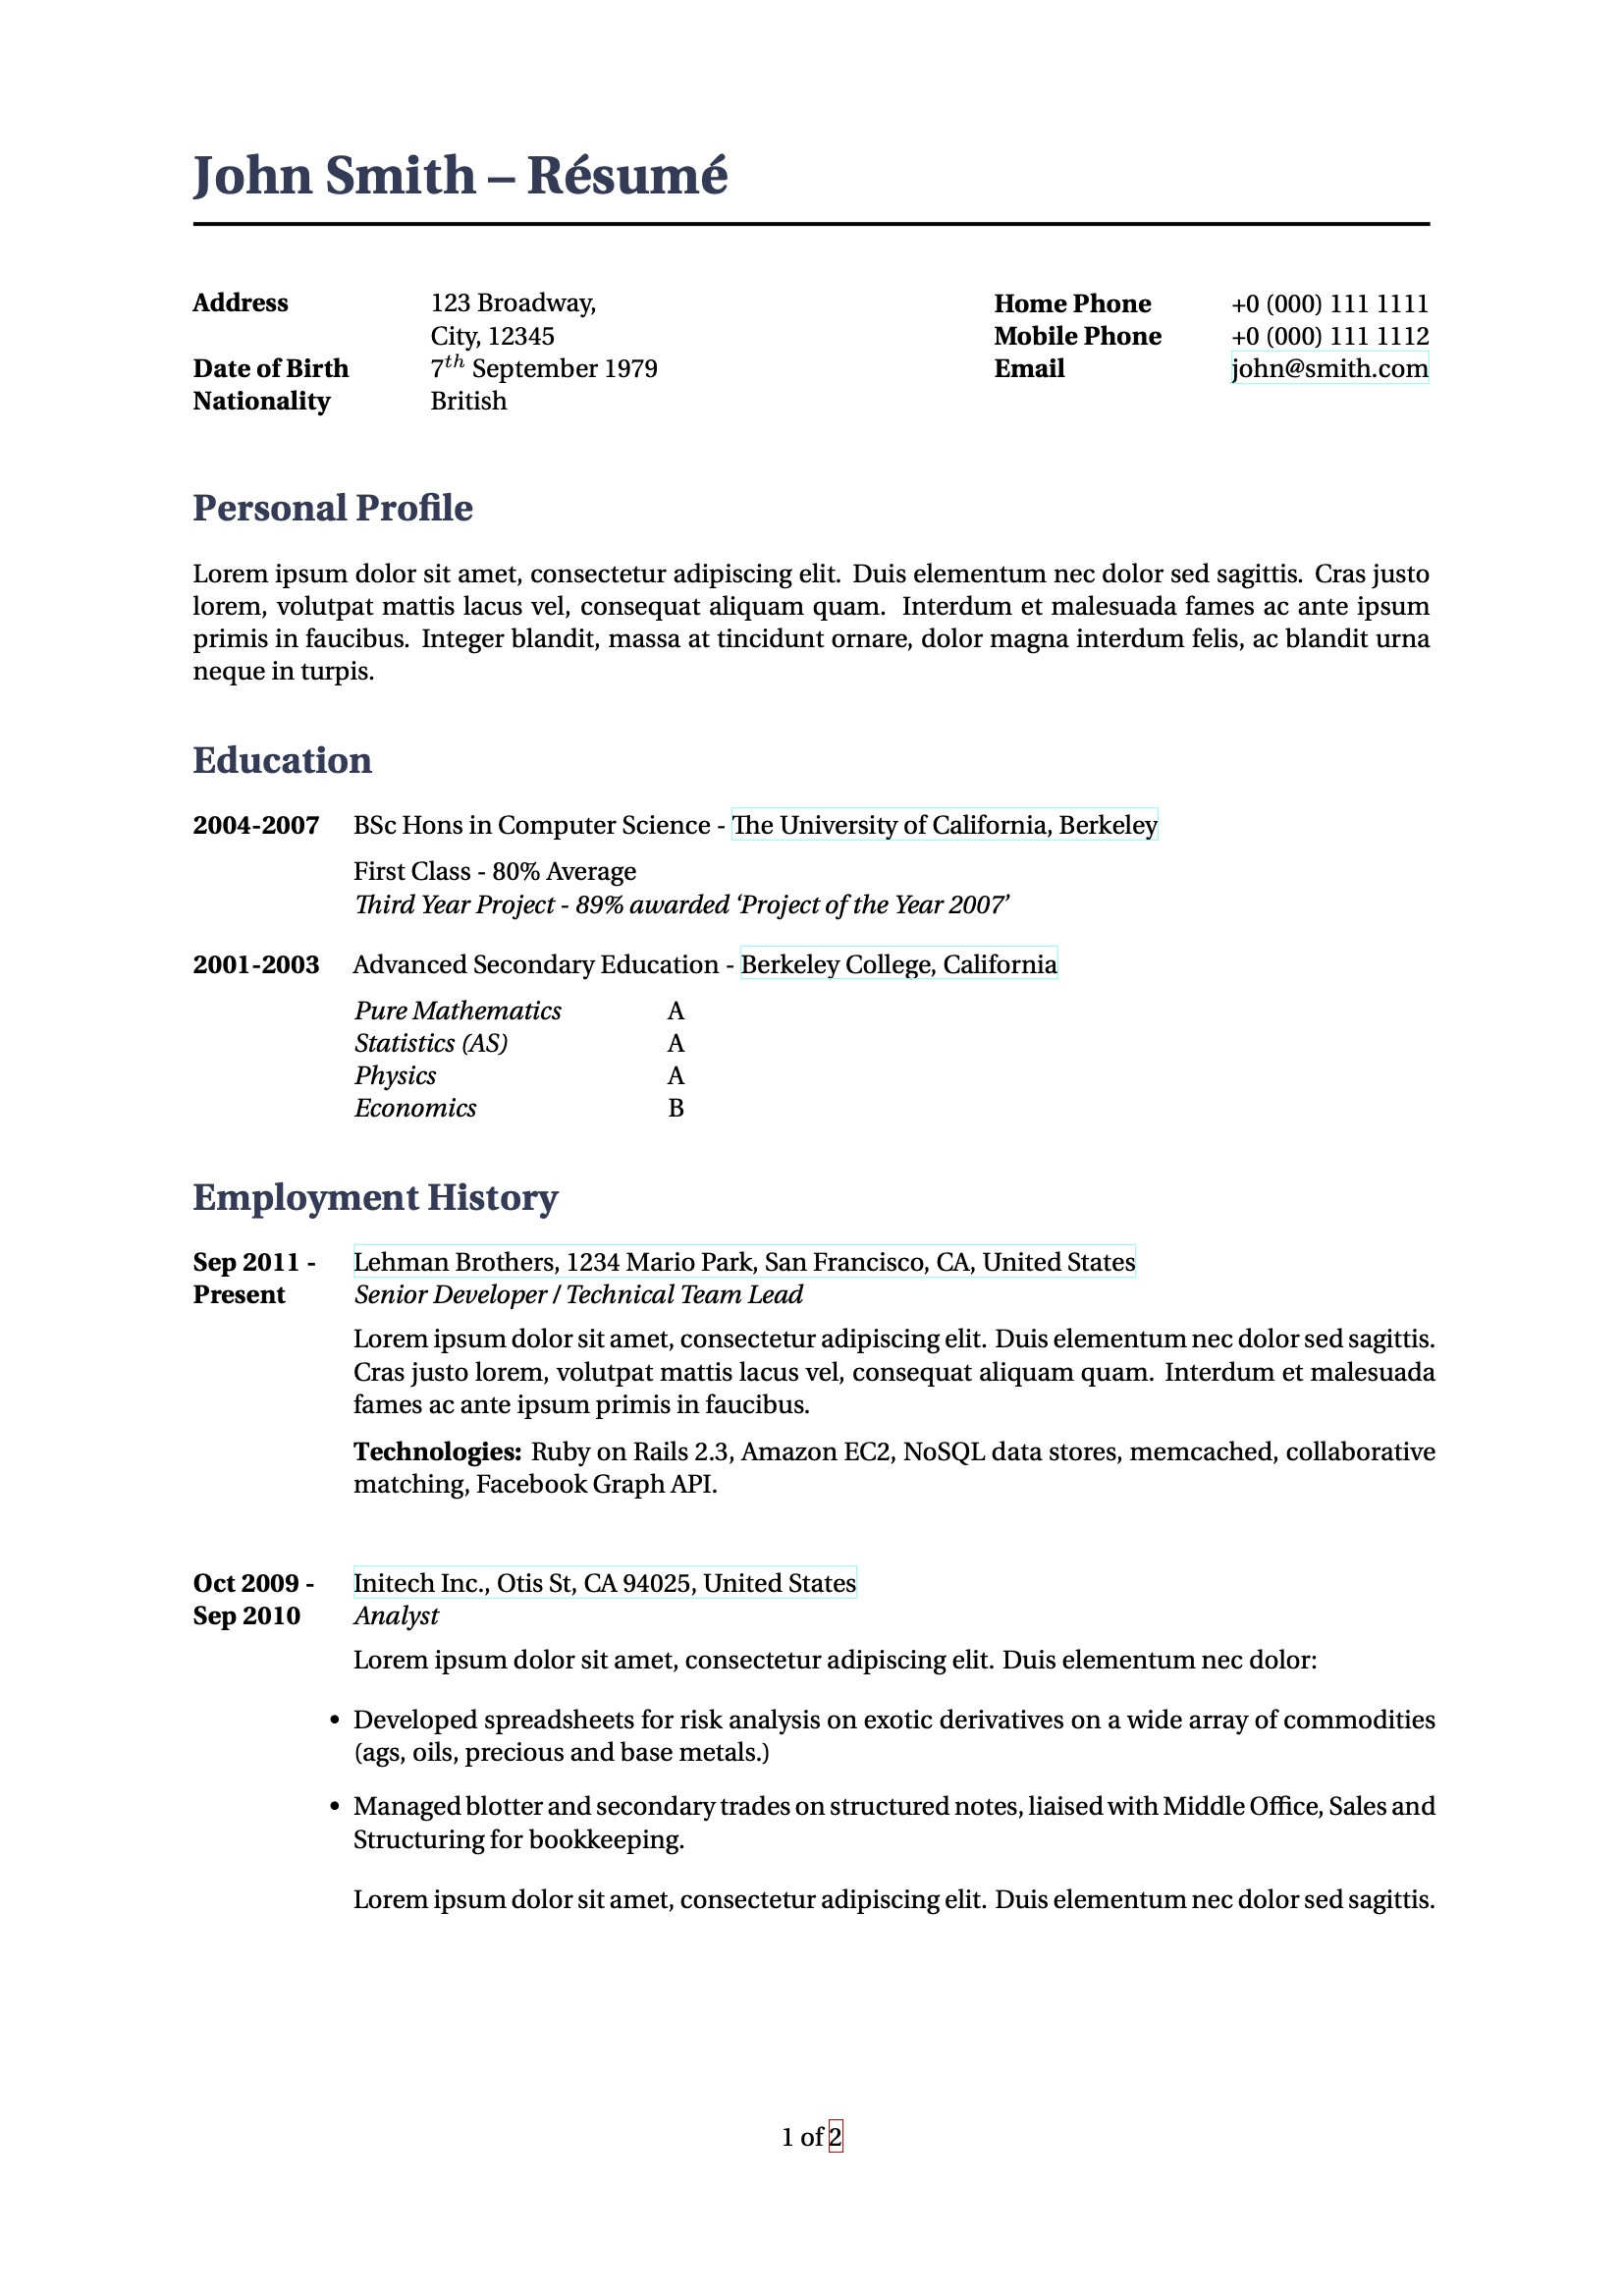 Sample Resume for Uc Berkeley Students Latex Templates – Cvs and Resumes